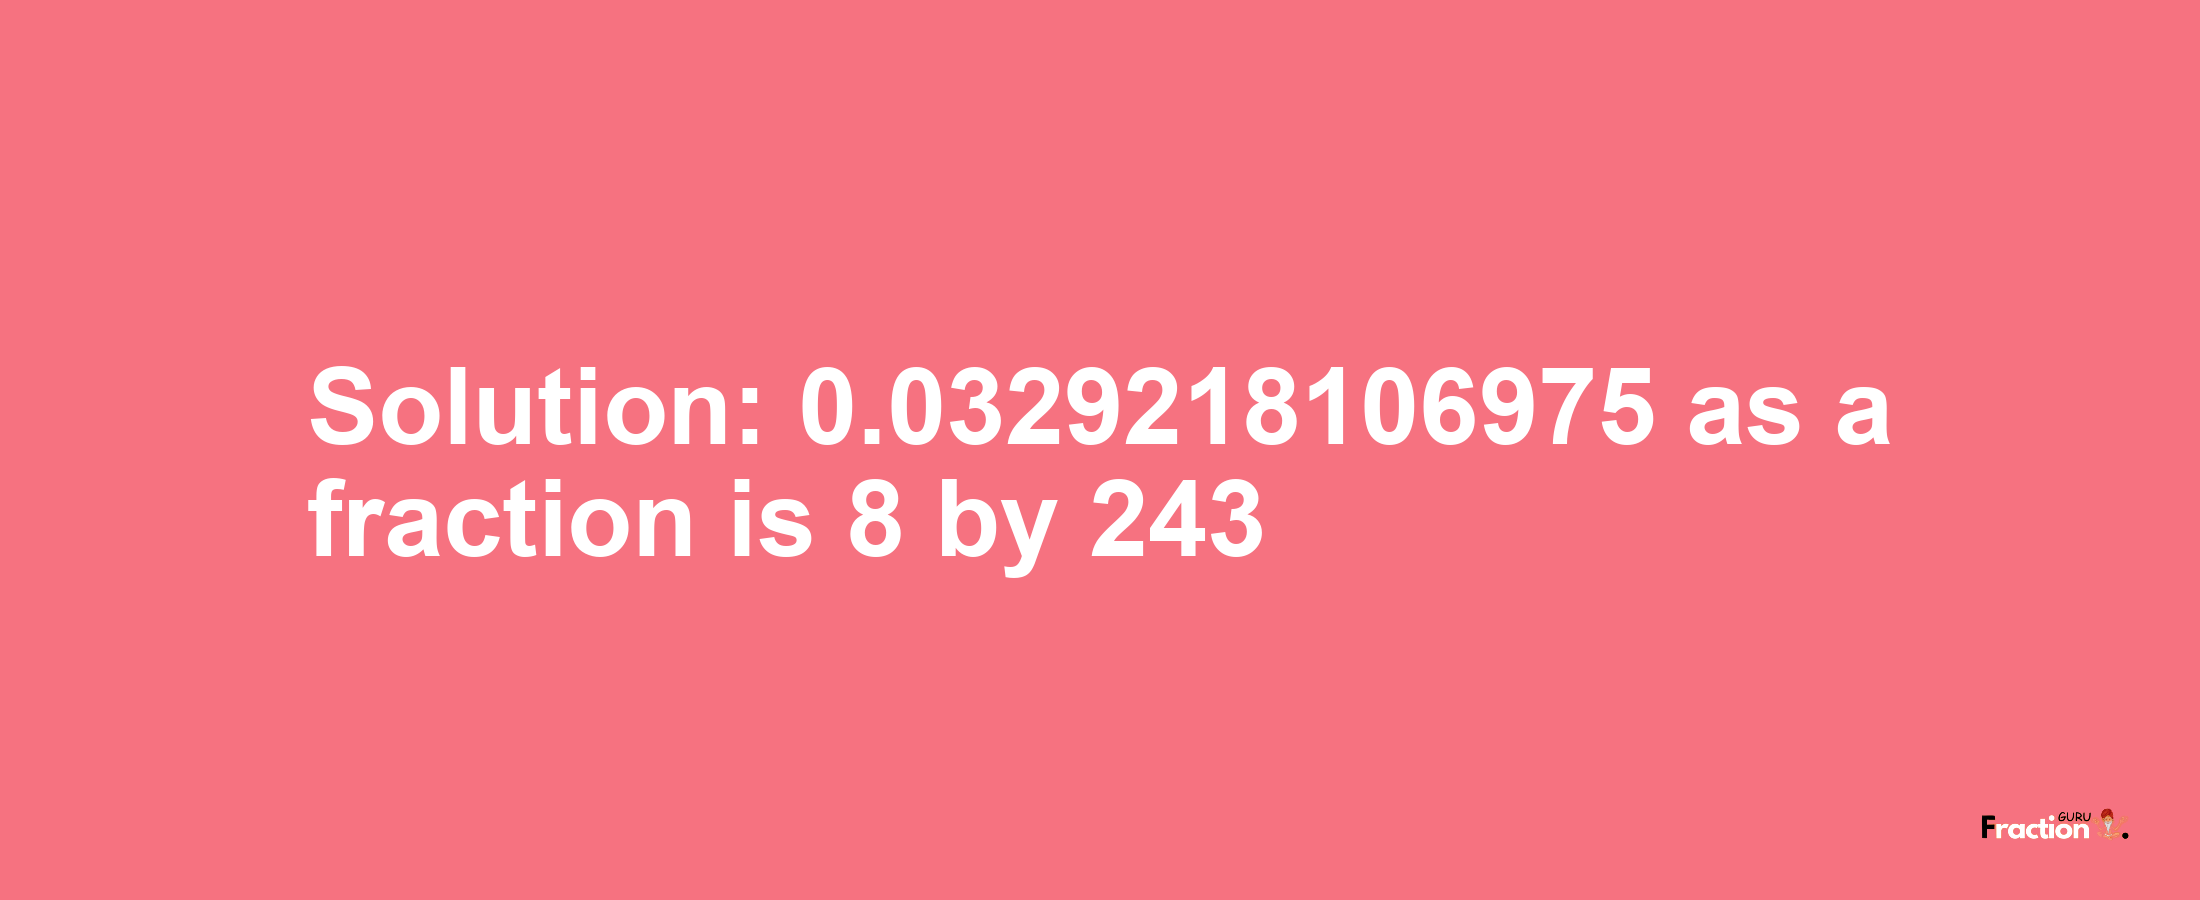 Solution:0.0329218106975 as a fraction is 8/243